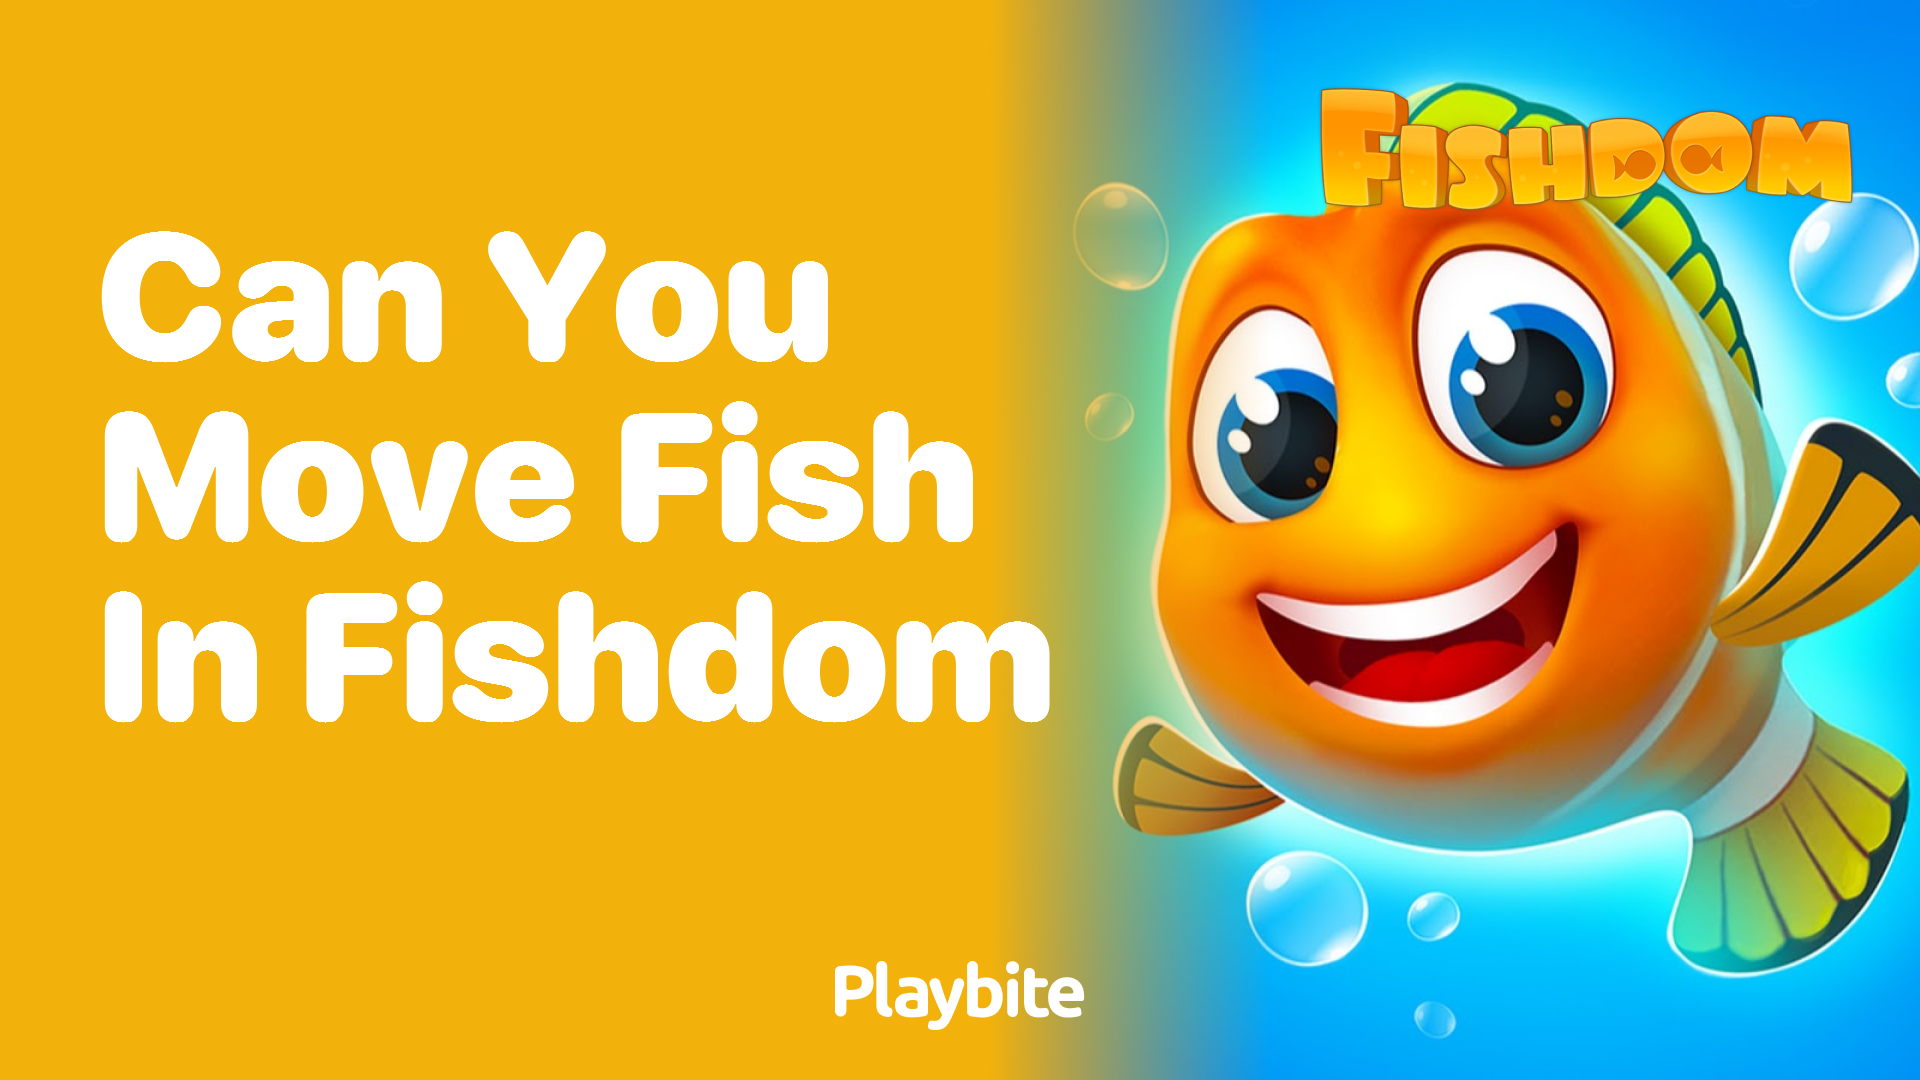 Can You Move Fish in Fishdom? Uncover the Answer!